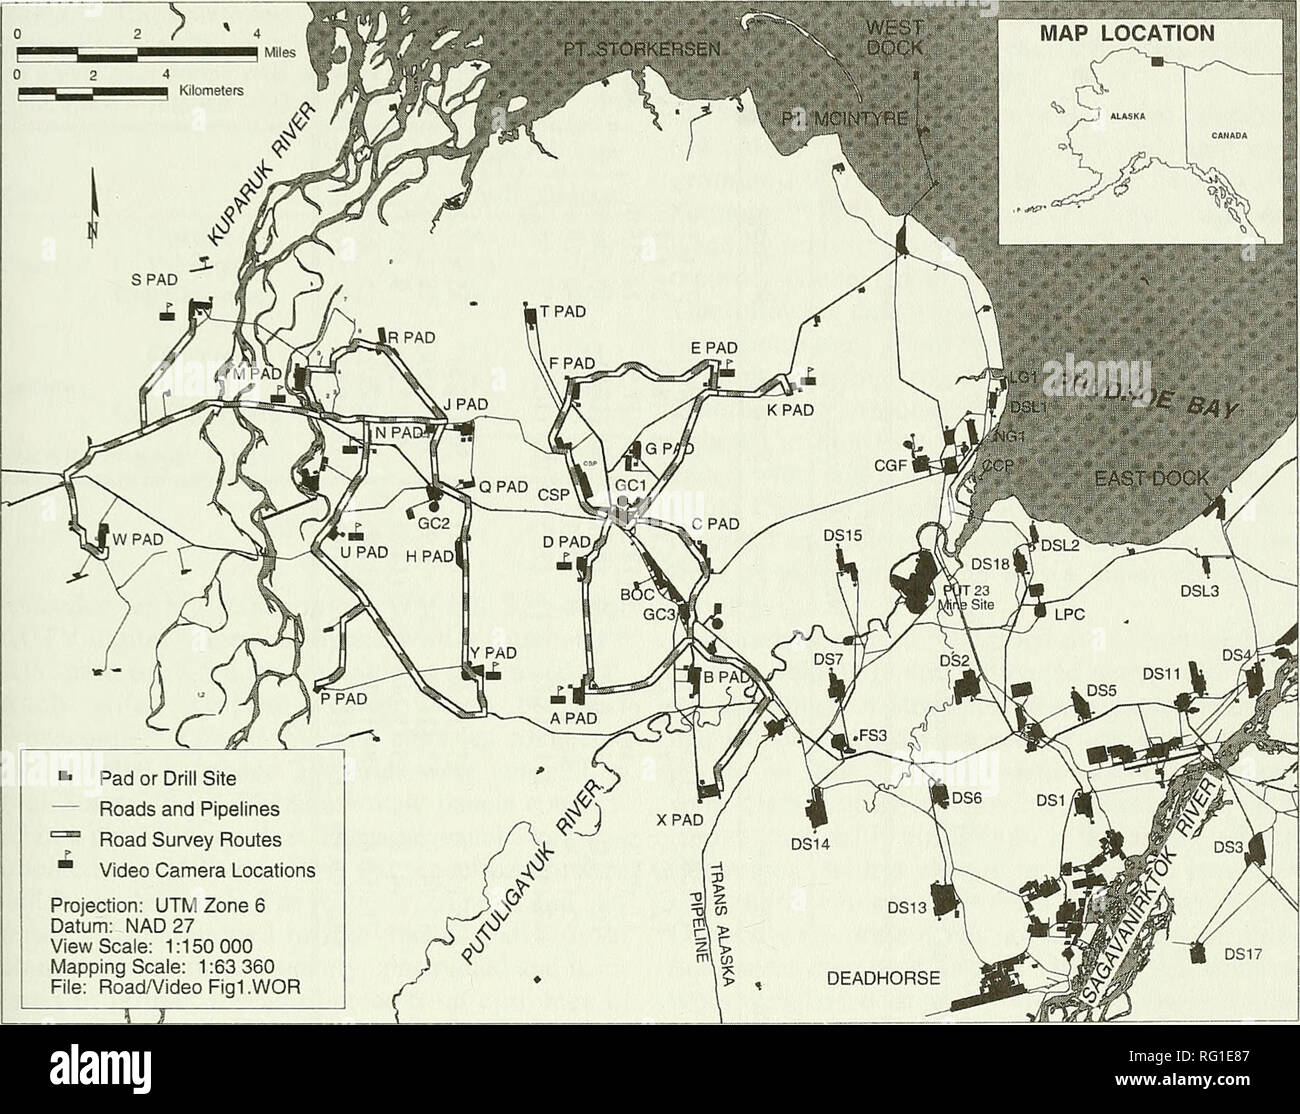 . The Canadian field-naturalist. 1998 Noel, Pollard, Ballard, and Cronin:Use of Gravel Pads and Tundra by Caribou 401 LOCATION. â â Pad or Drill Site â Roads and Pipelines Road Survey Routes Video Camera Locations Projection: UTM Zone 6 Datum; NAD 27 View Scale: 1:150 000 Mapping Scale: 1:63 360 File: Road/Video Figl.WOR Figure I. Location of road survey routes and time-lapse video cameras used to monitor Caribou activity in the Prudhoe Bay oil field, Alaska, summer 1993. Caribou groups were counted more than once per day, total daily counts do not represent an accurate count of the number of  Stock Photo